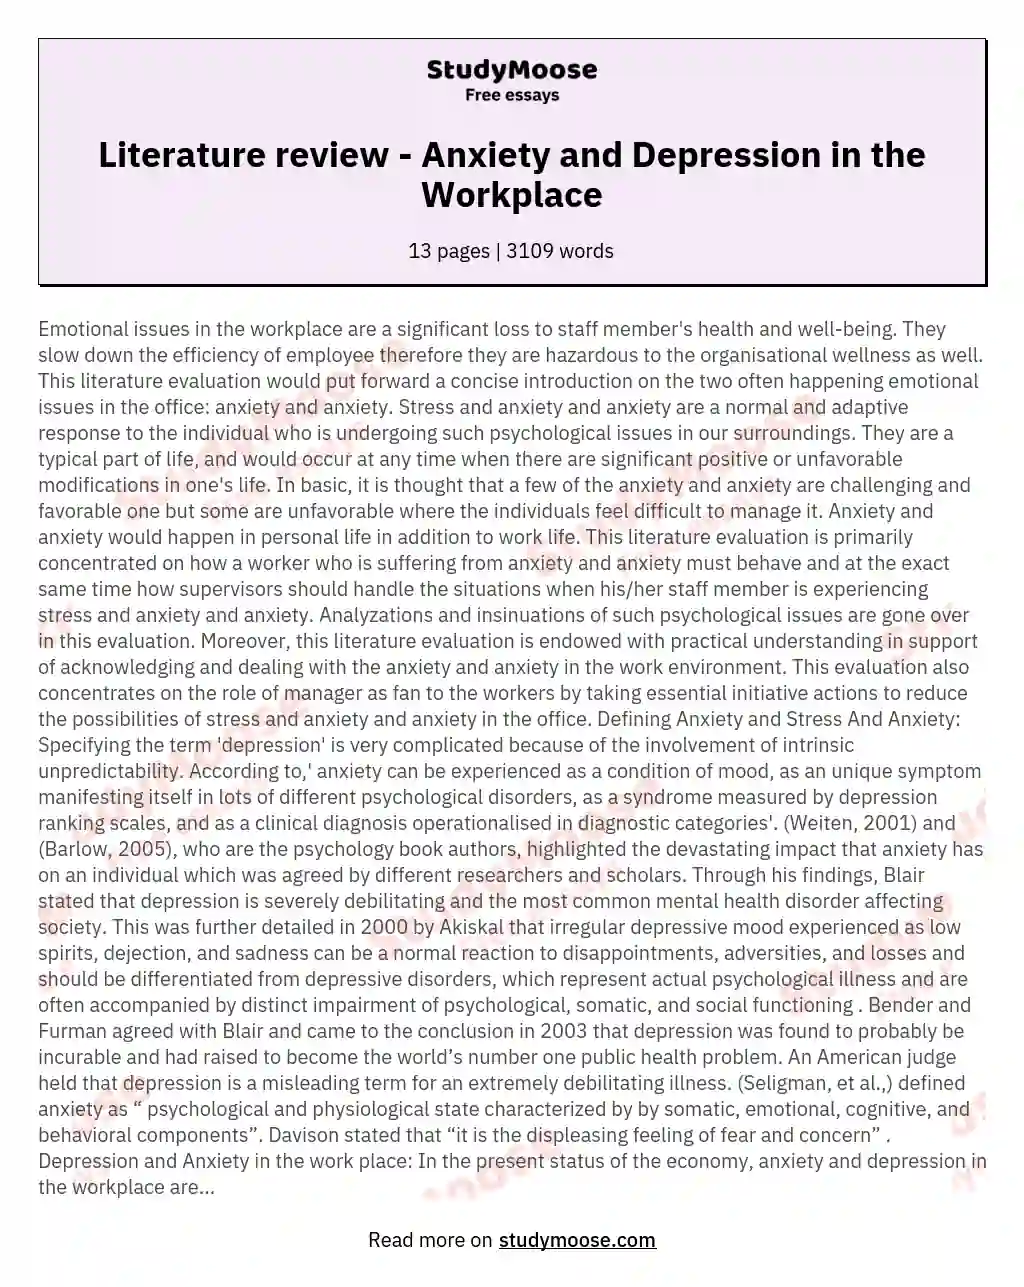 Literature review - Anxiety and Depression in the Workplace